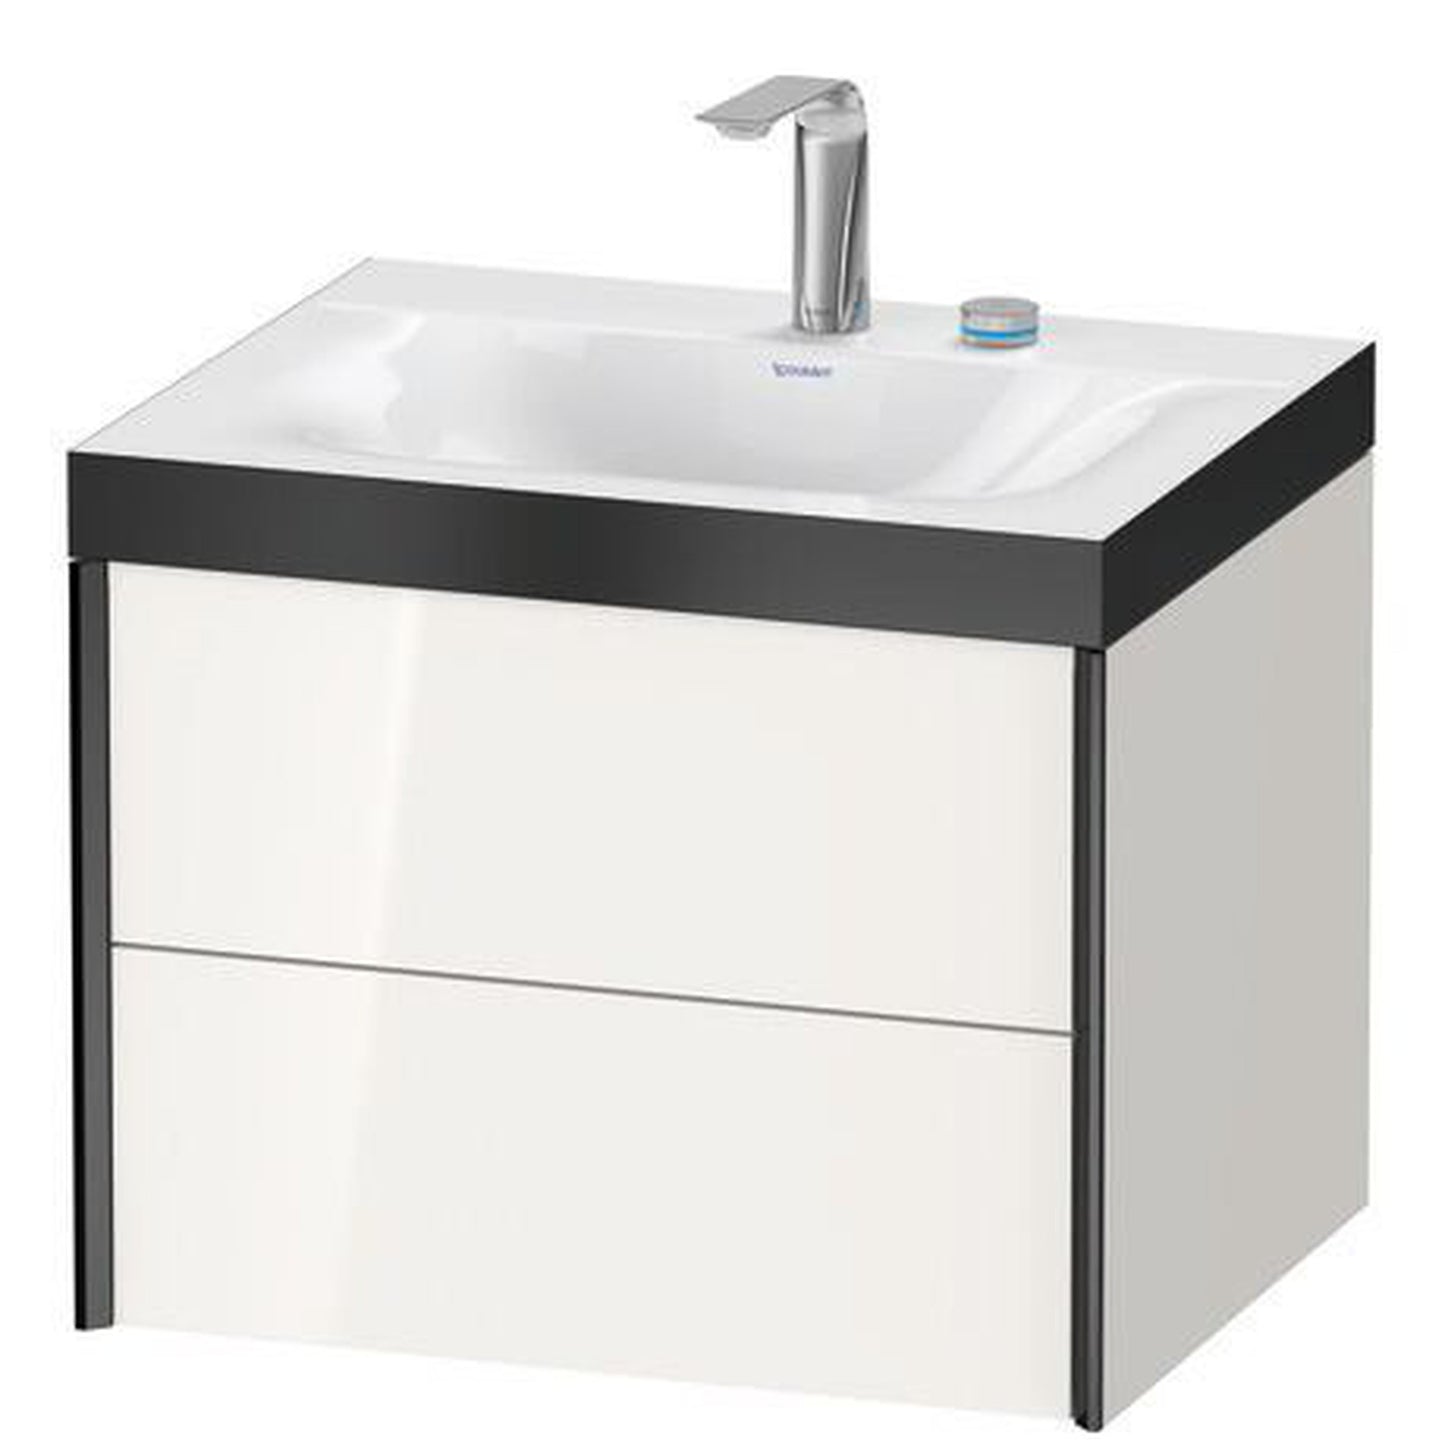 Duravit Xviu 24" x 20" x 19" Two Drawer C-Bonded Wall-Mount Vanity Kit With Two Tap Holes, White (XV4614EB222P)